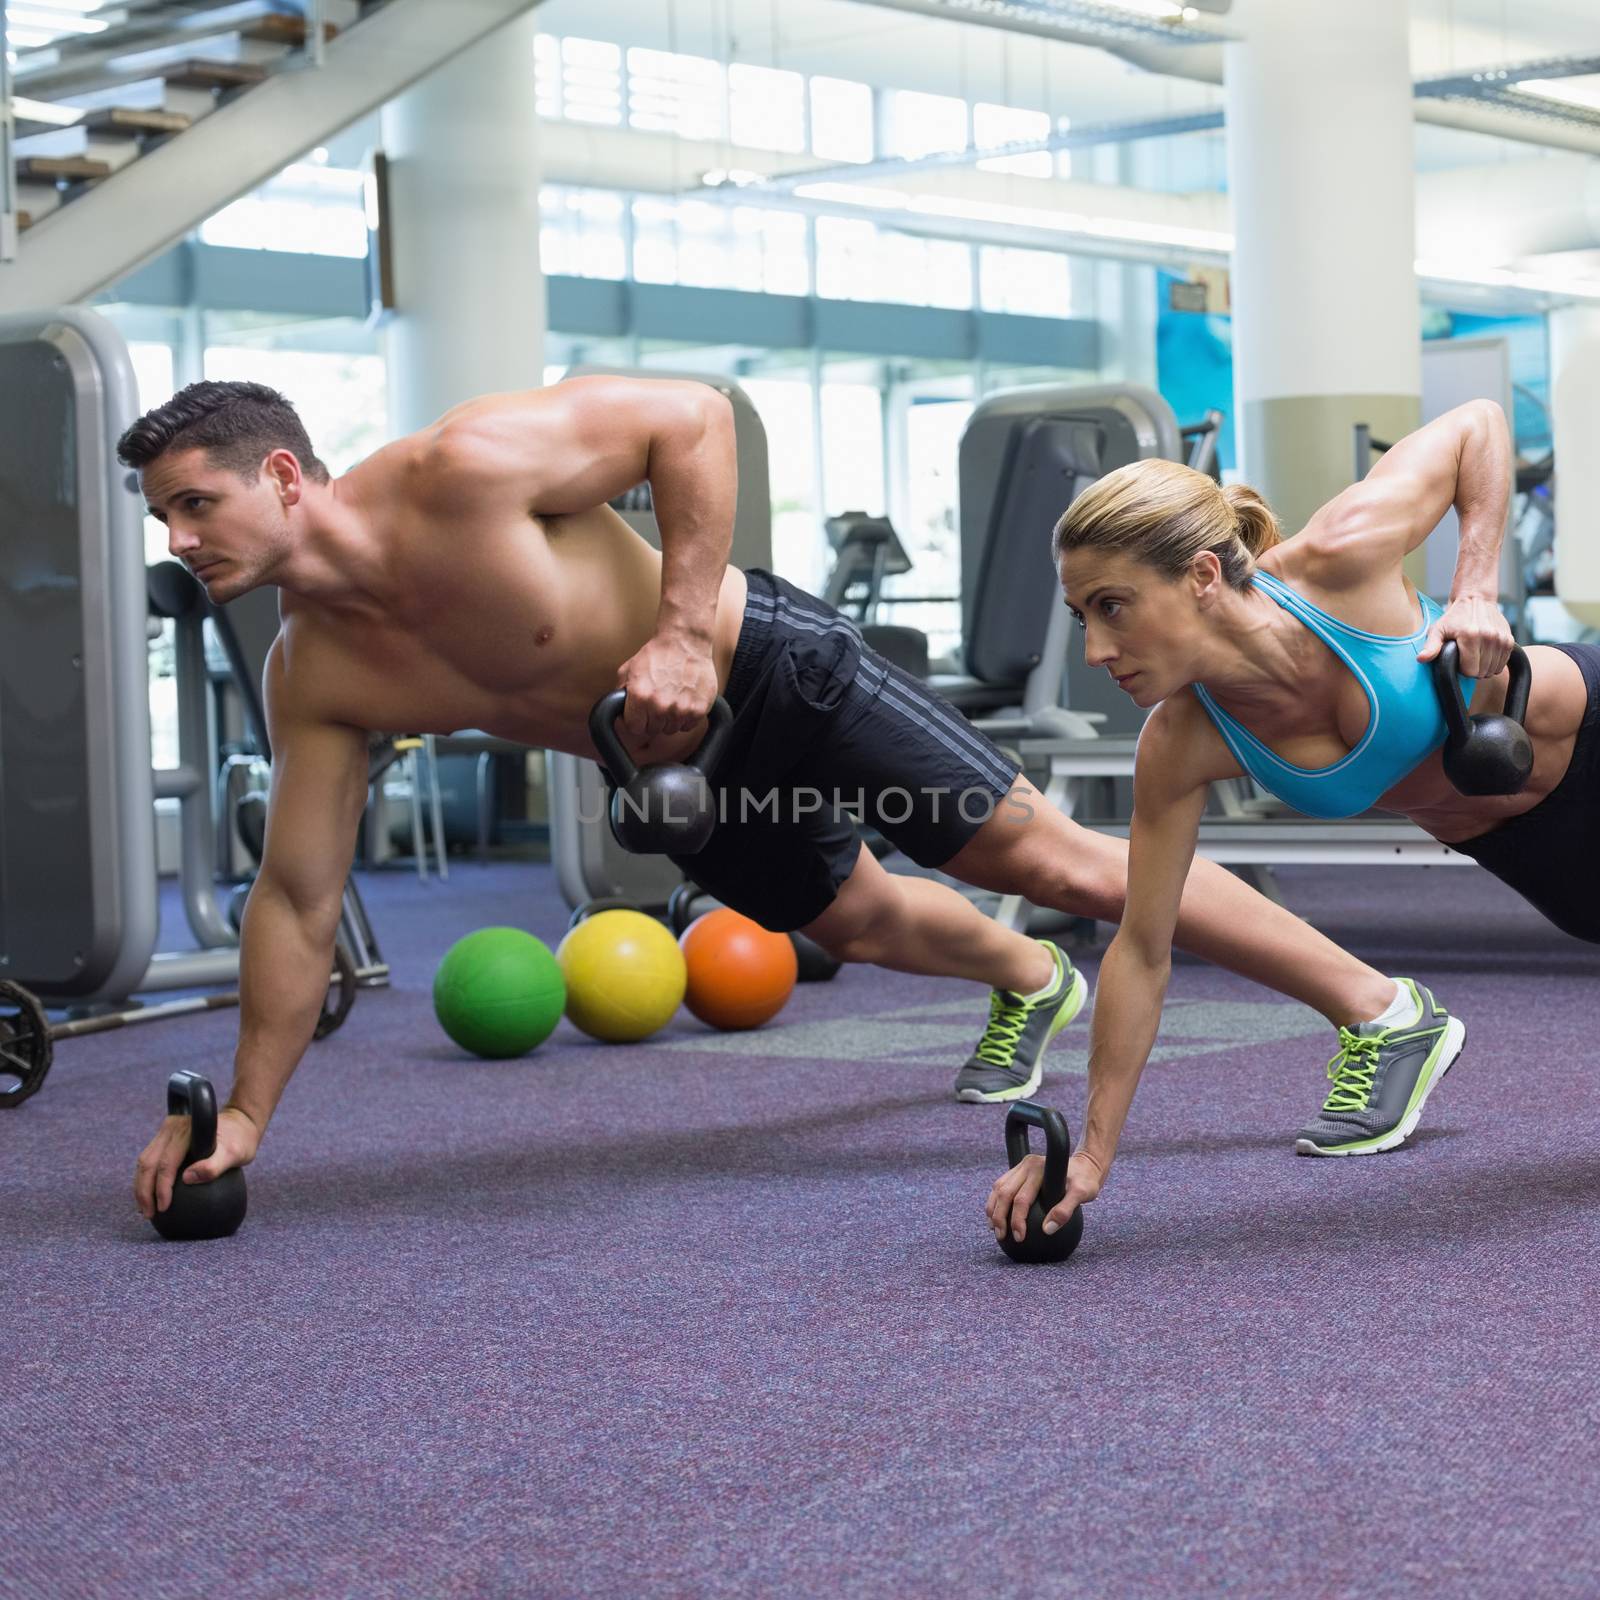 Bodybuilding man and woman lifting kettlebells in plank position at the gym